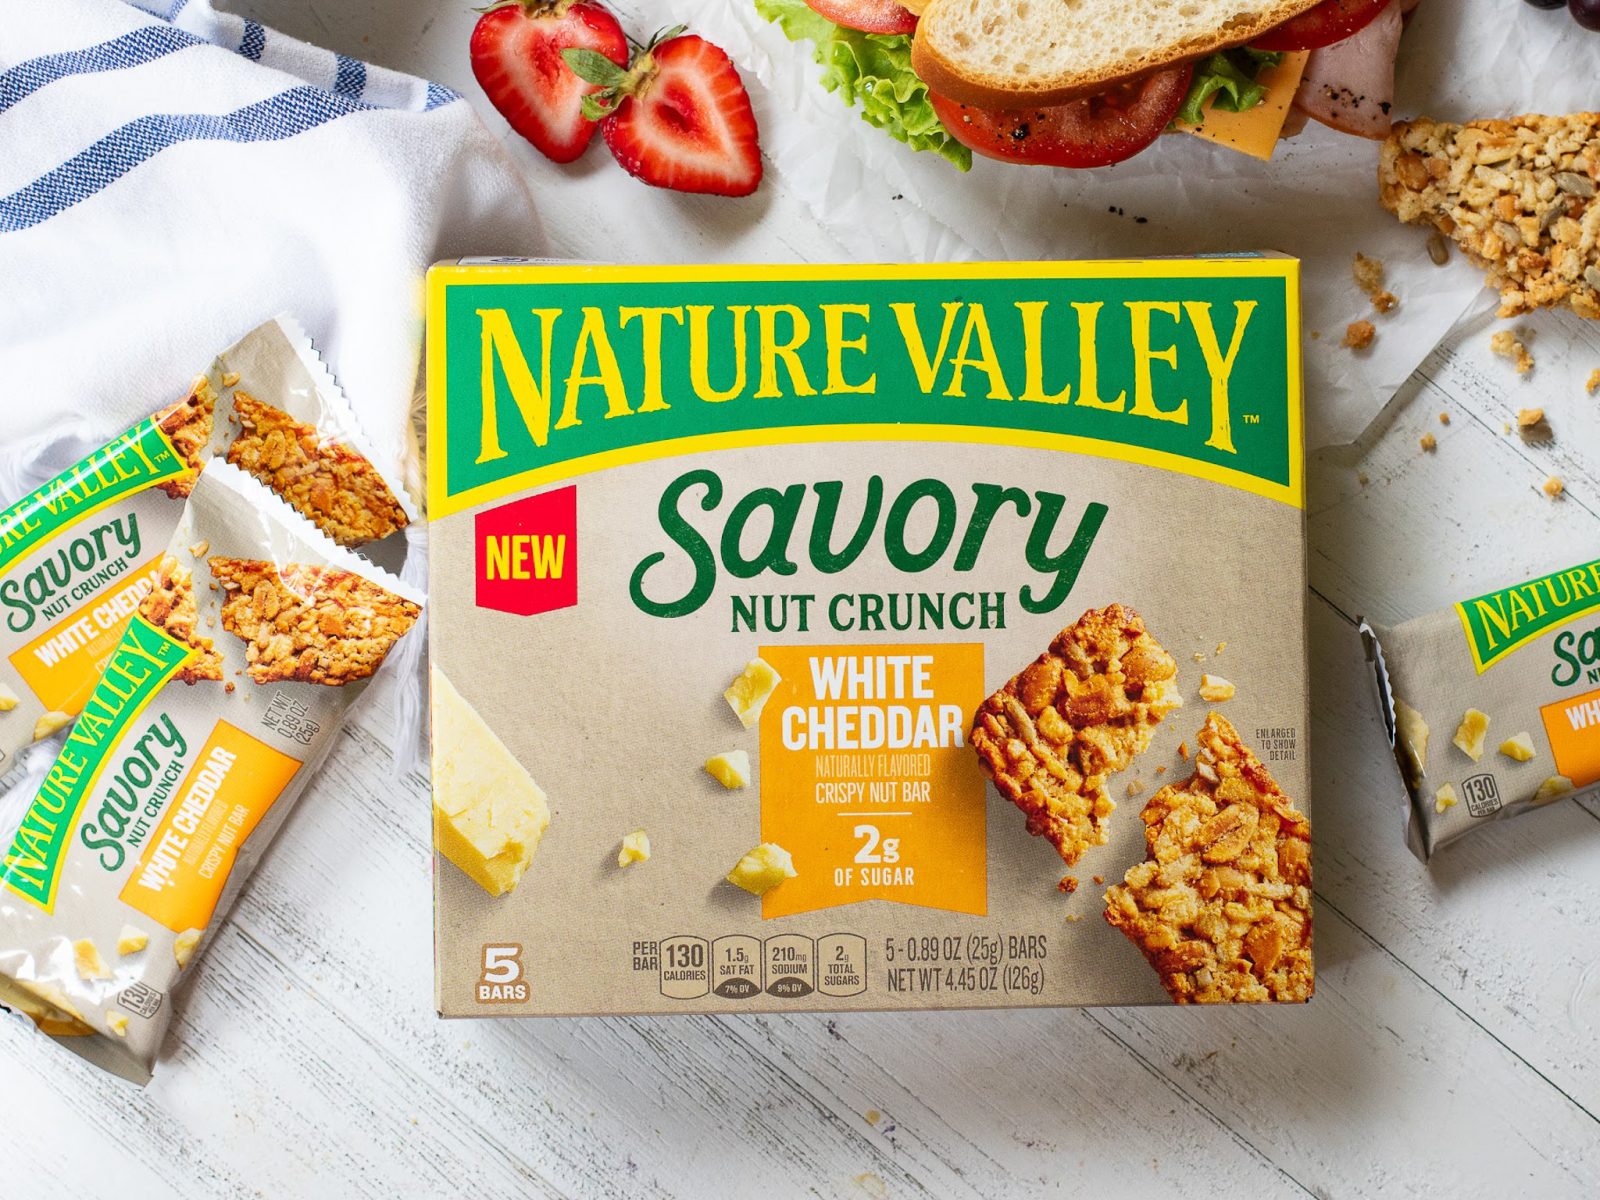 Get Nature Valley Savory Bars For As Low As $1.50 At Kroger